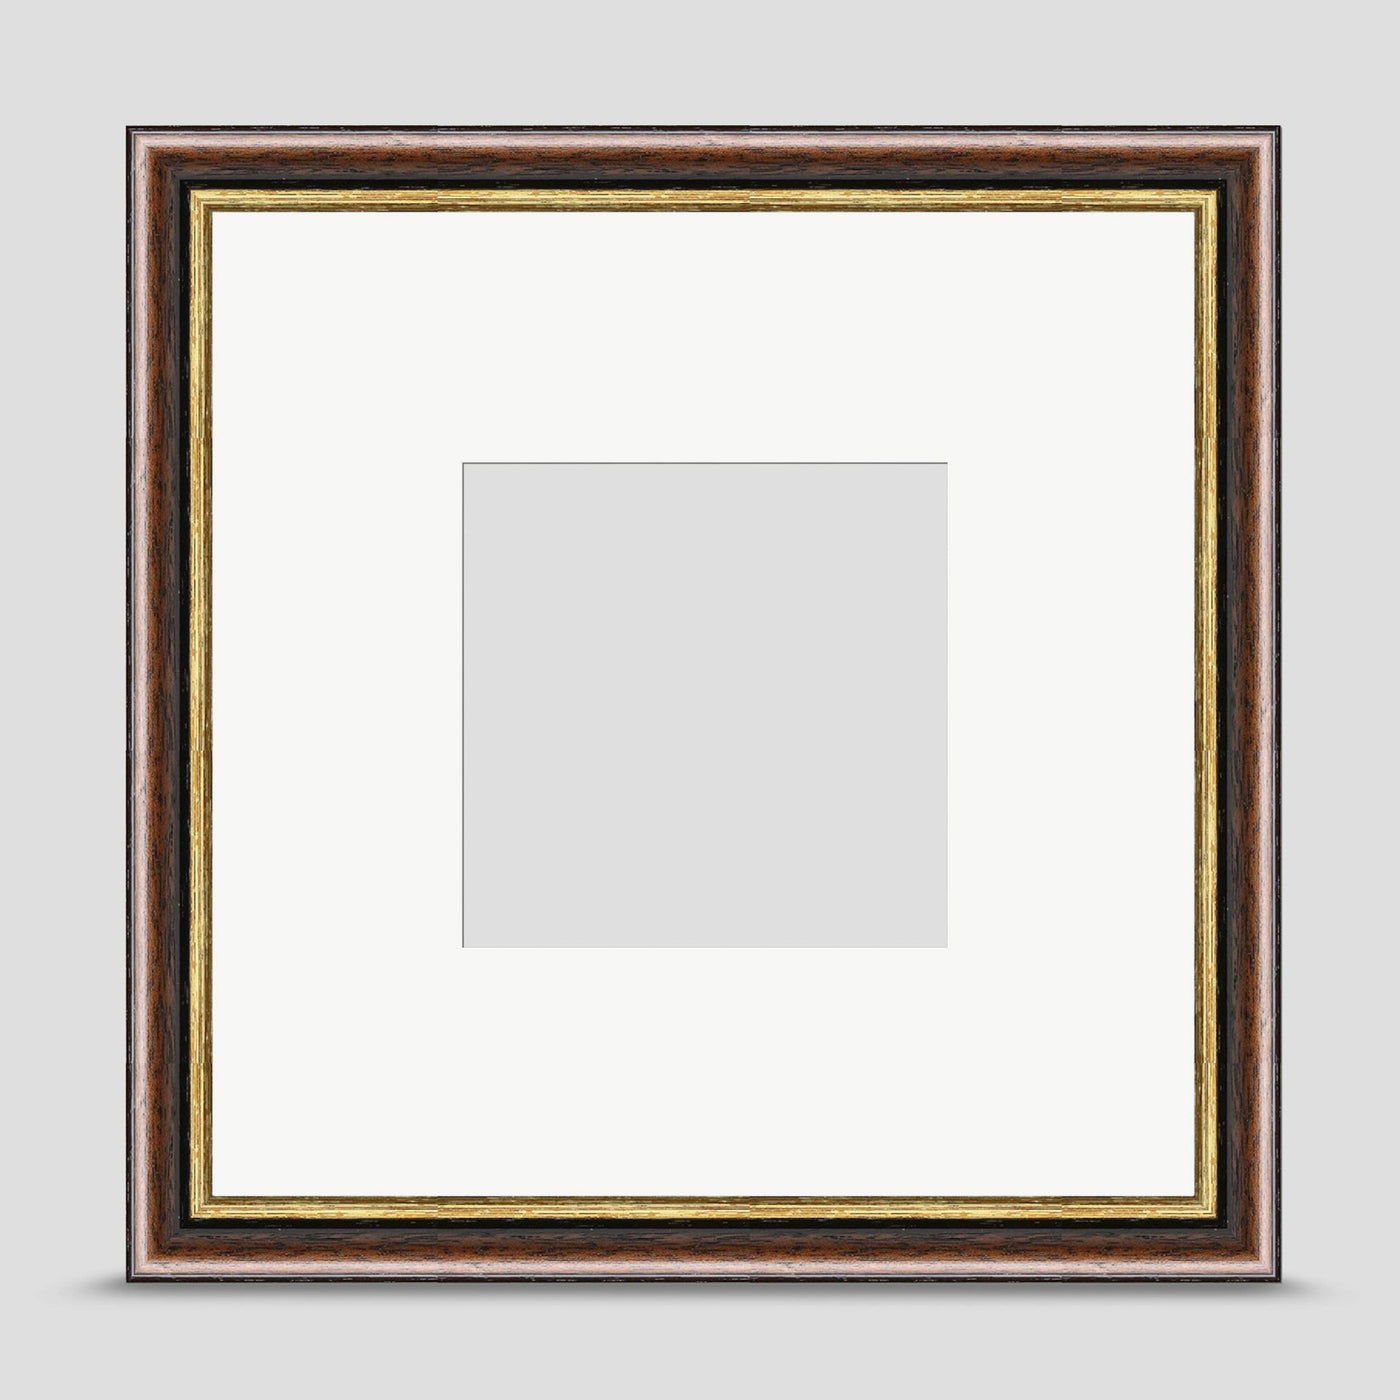 10x10 Brown & Gold Picture Frame with a 6x6 Mount